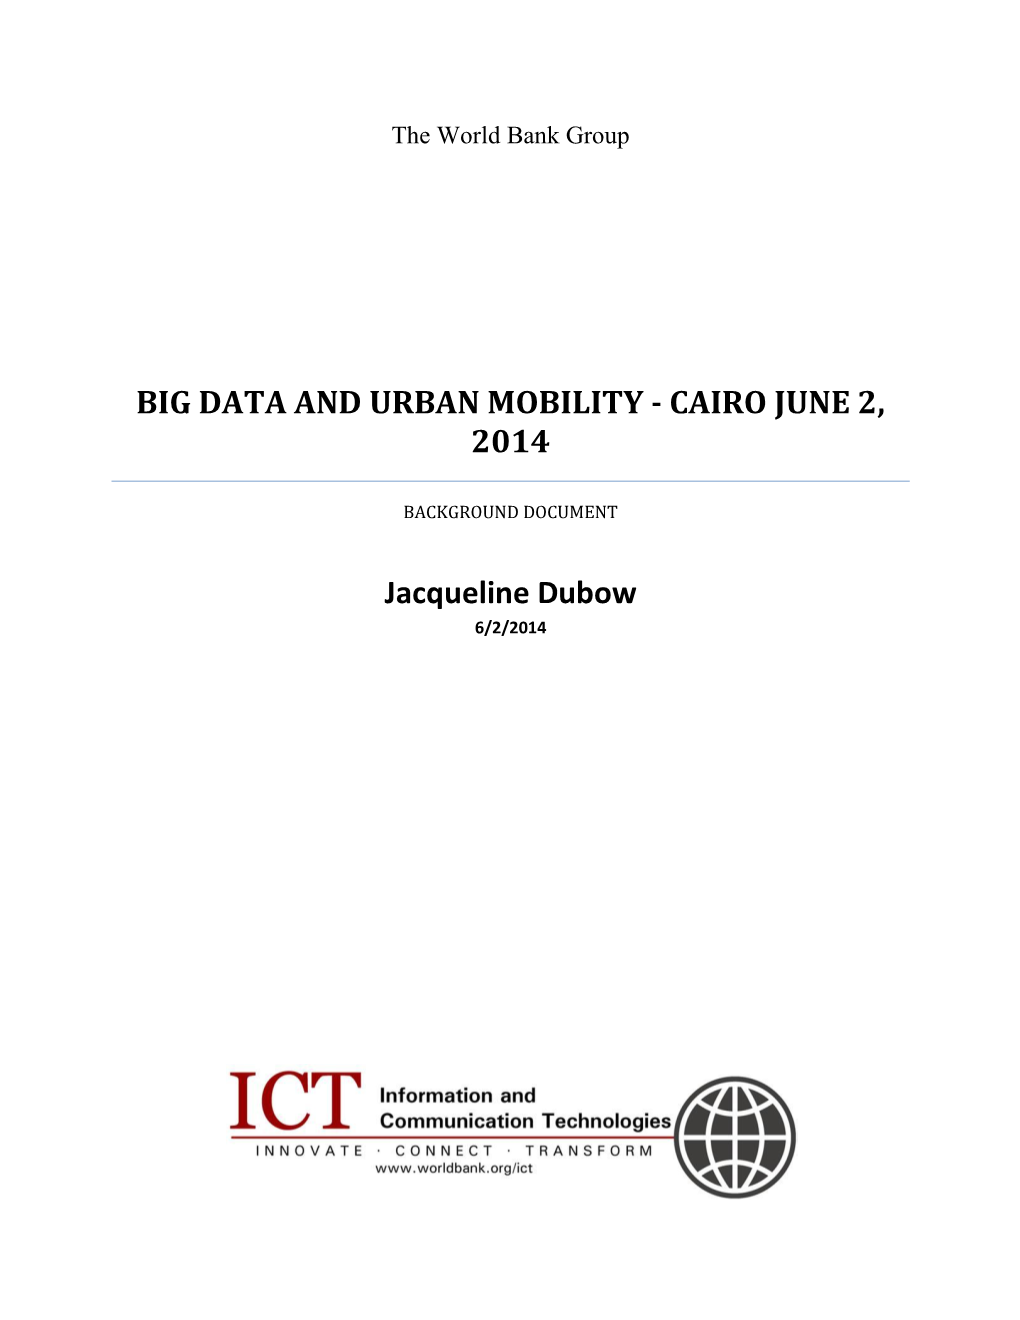 Big Data and Urban Mobility - Cairo June 2, 2014